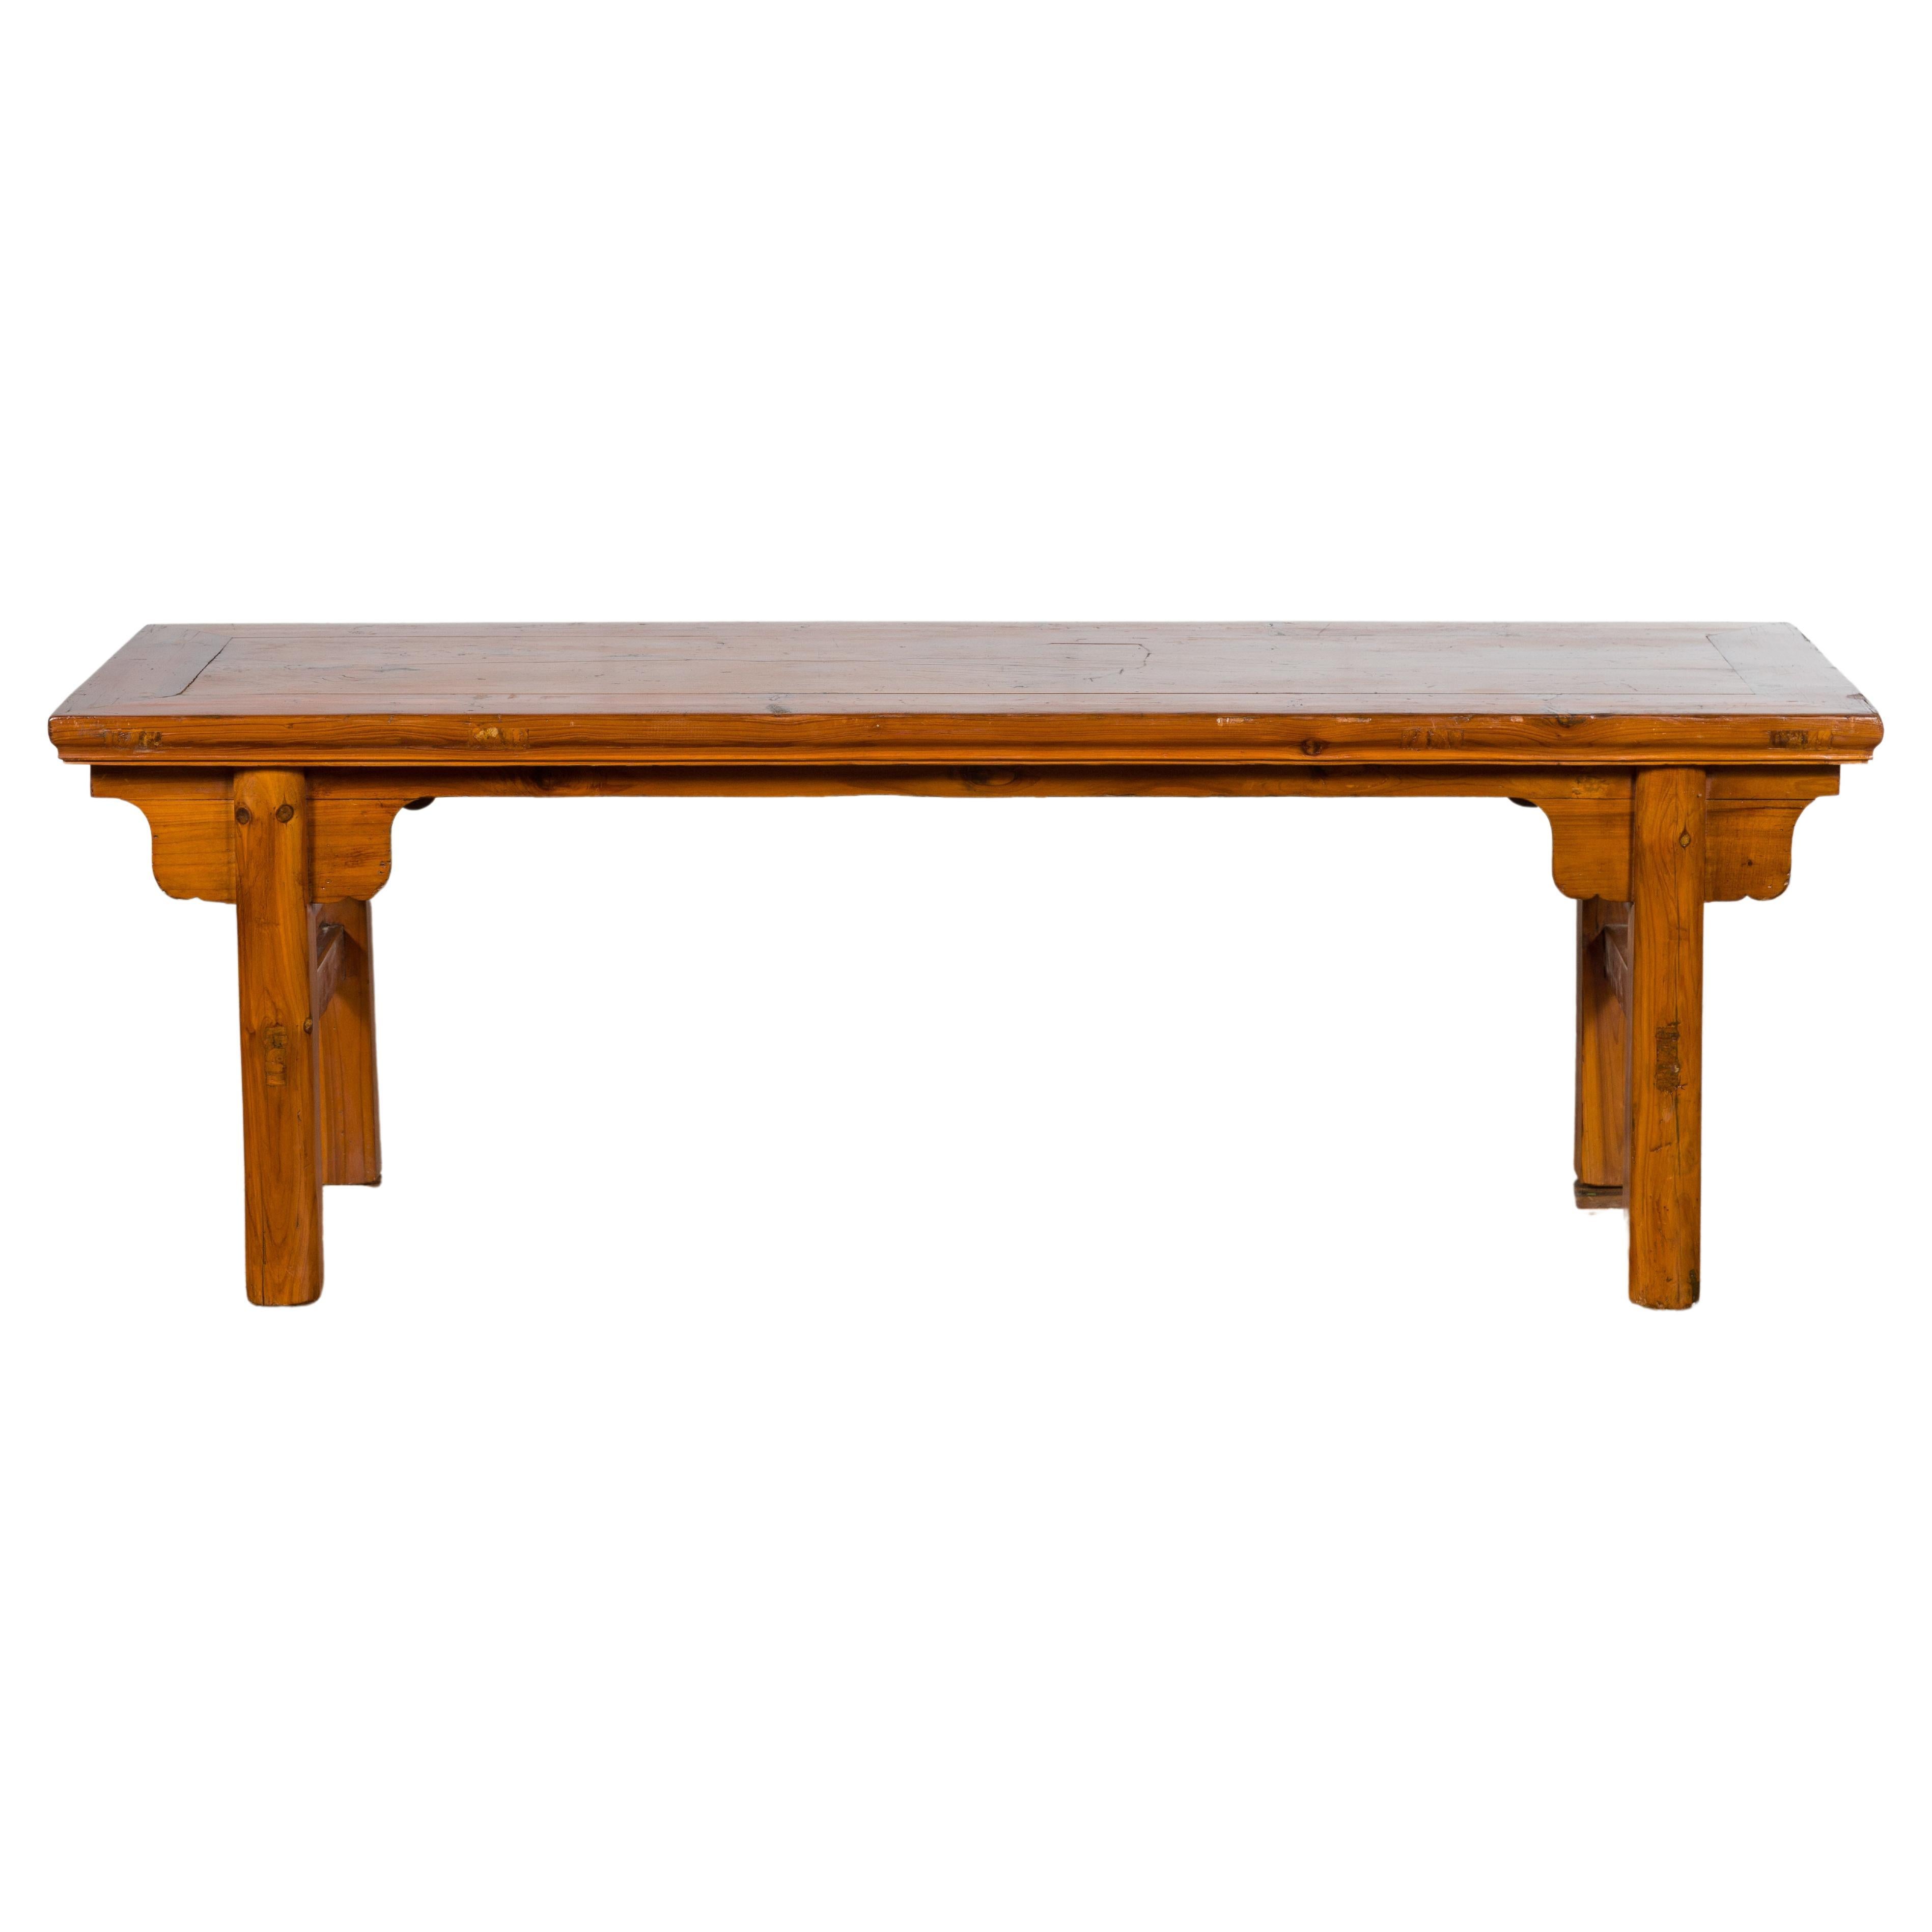 An antique Chinese cocktail table from the early 20th century, with carved spandrels and straight legs. Created in China during the early years of the 20th century, this cocktail table features a rectangular top with central board, sitting above a